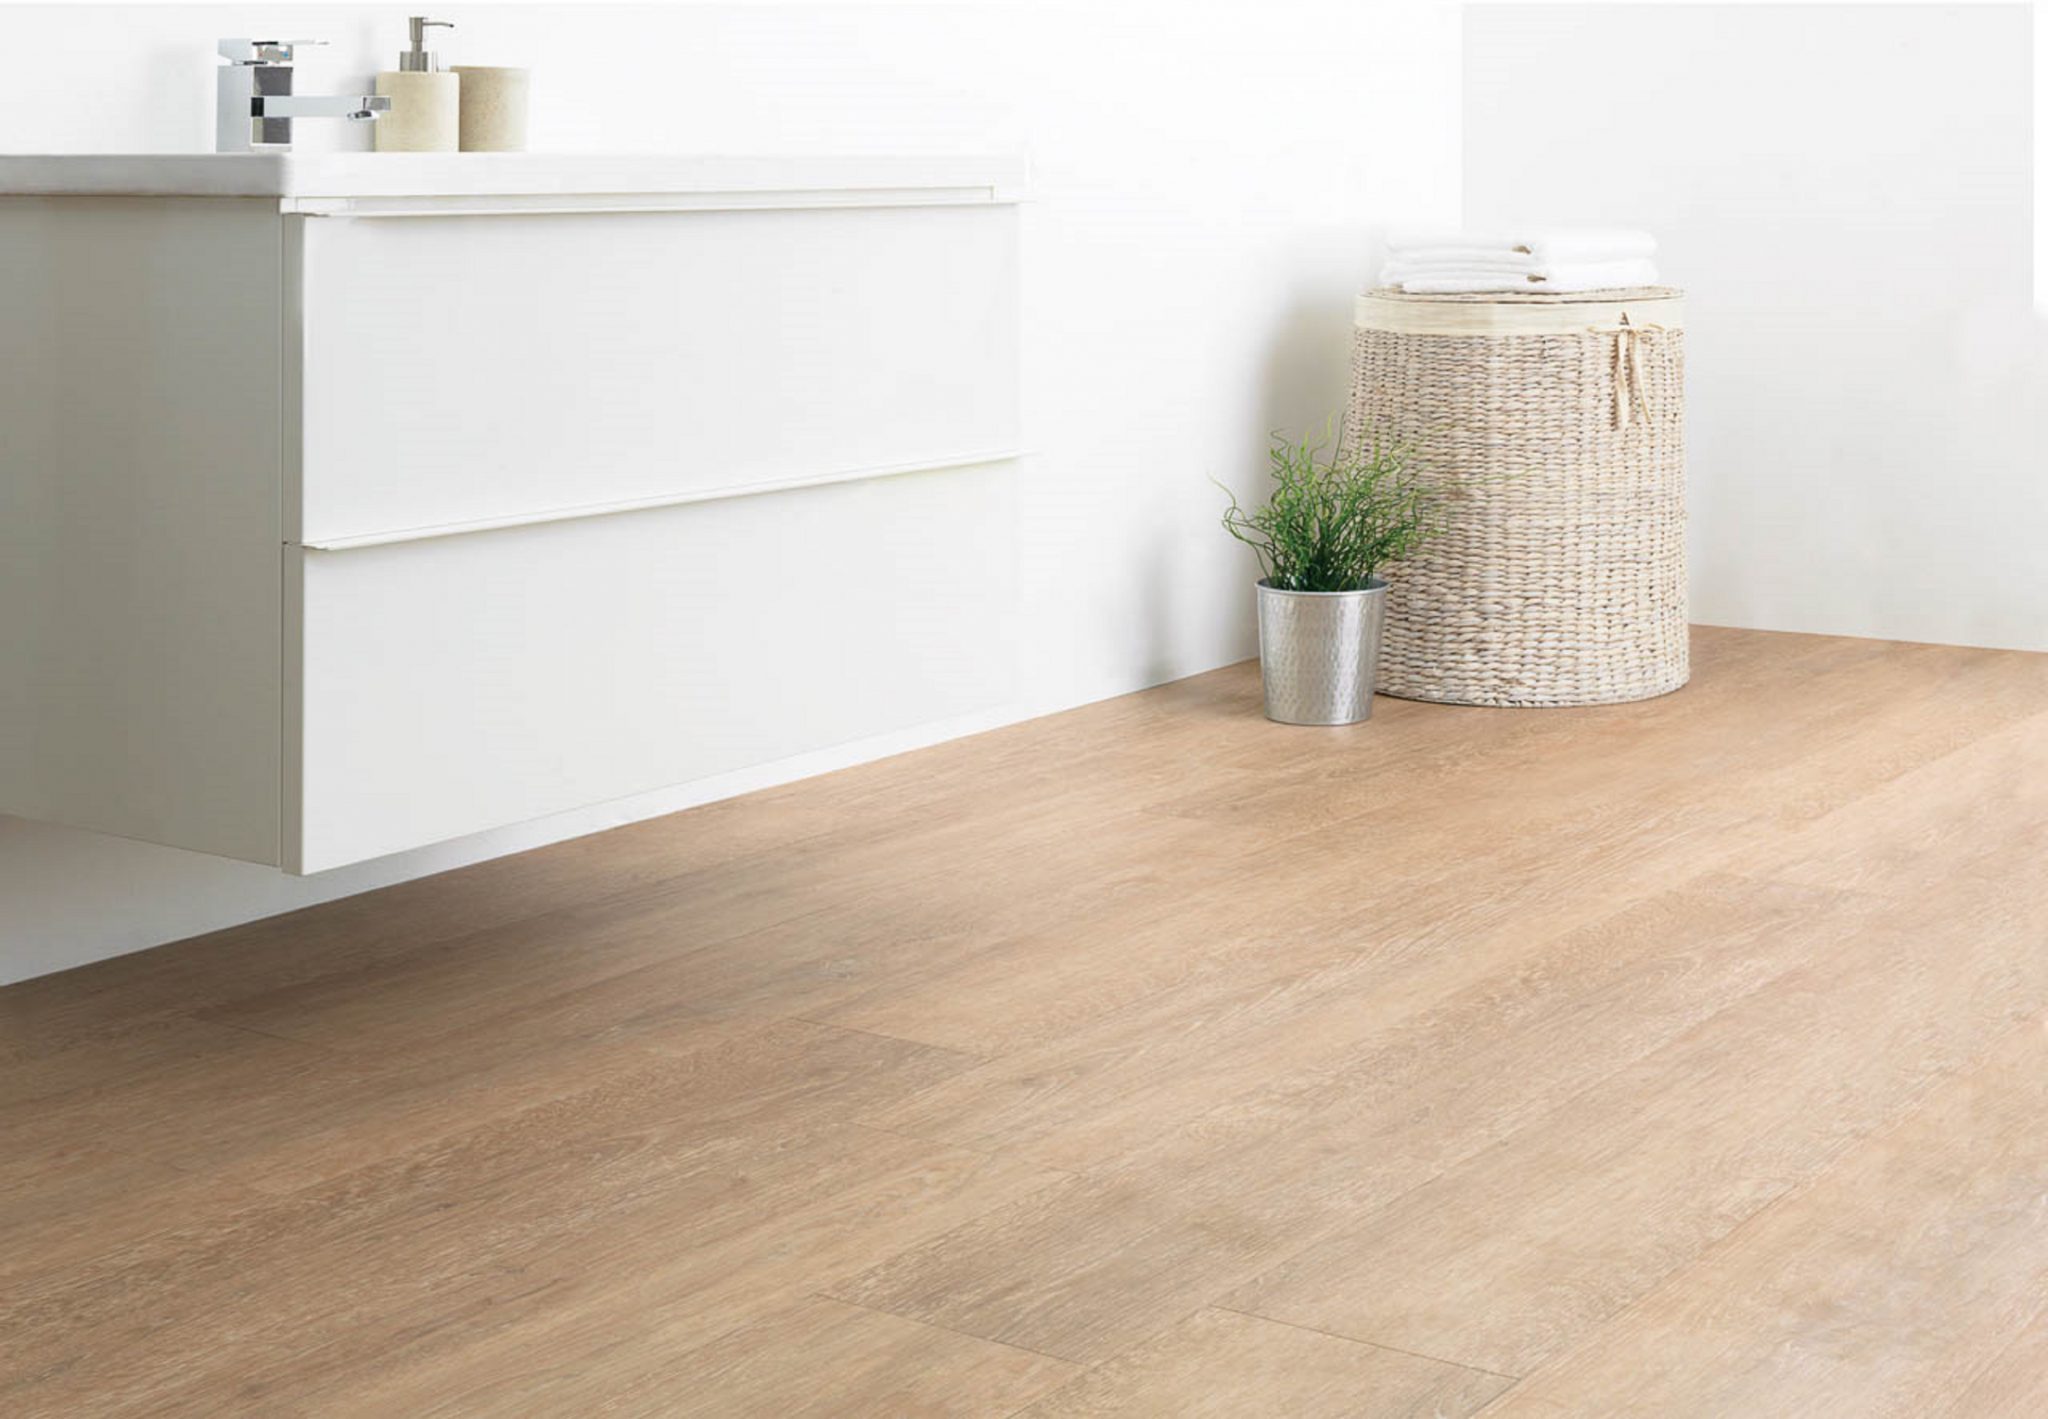 NEW CLICK LVT COLLECTIONS FROM DESIGNER CONTRACTS @DesignerContrac